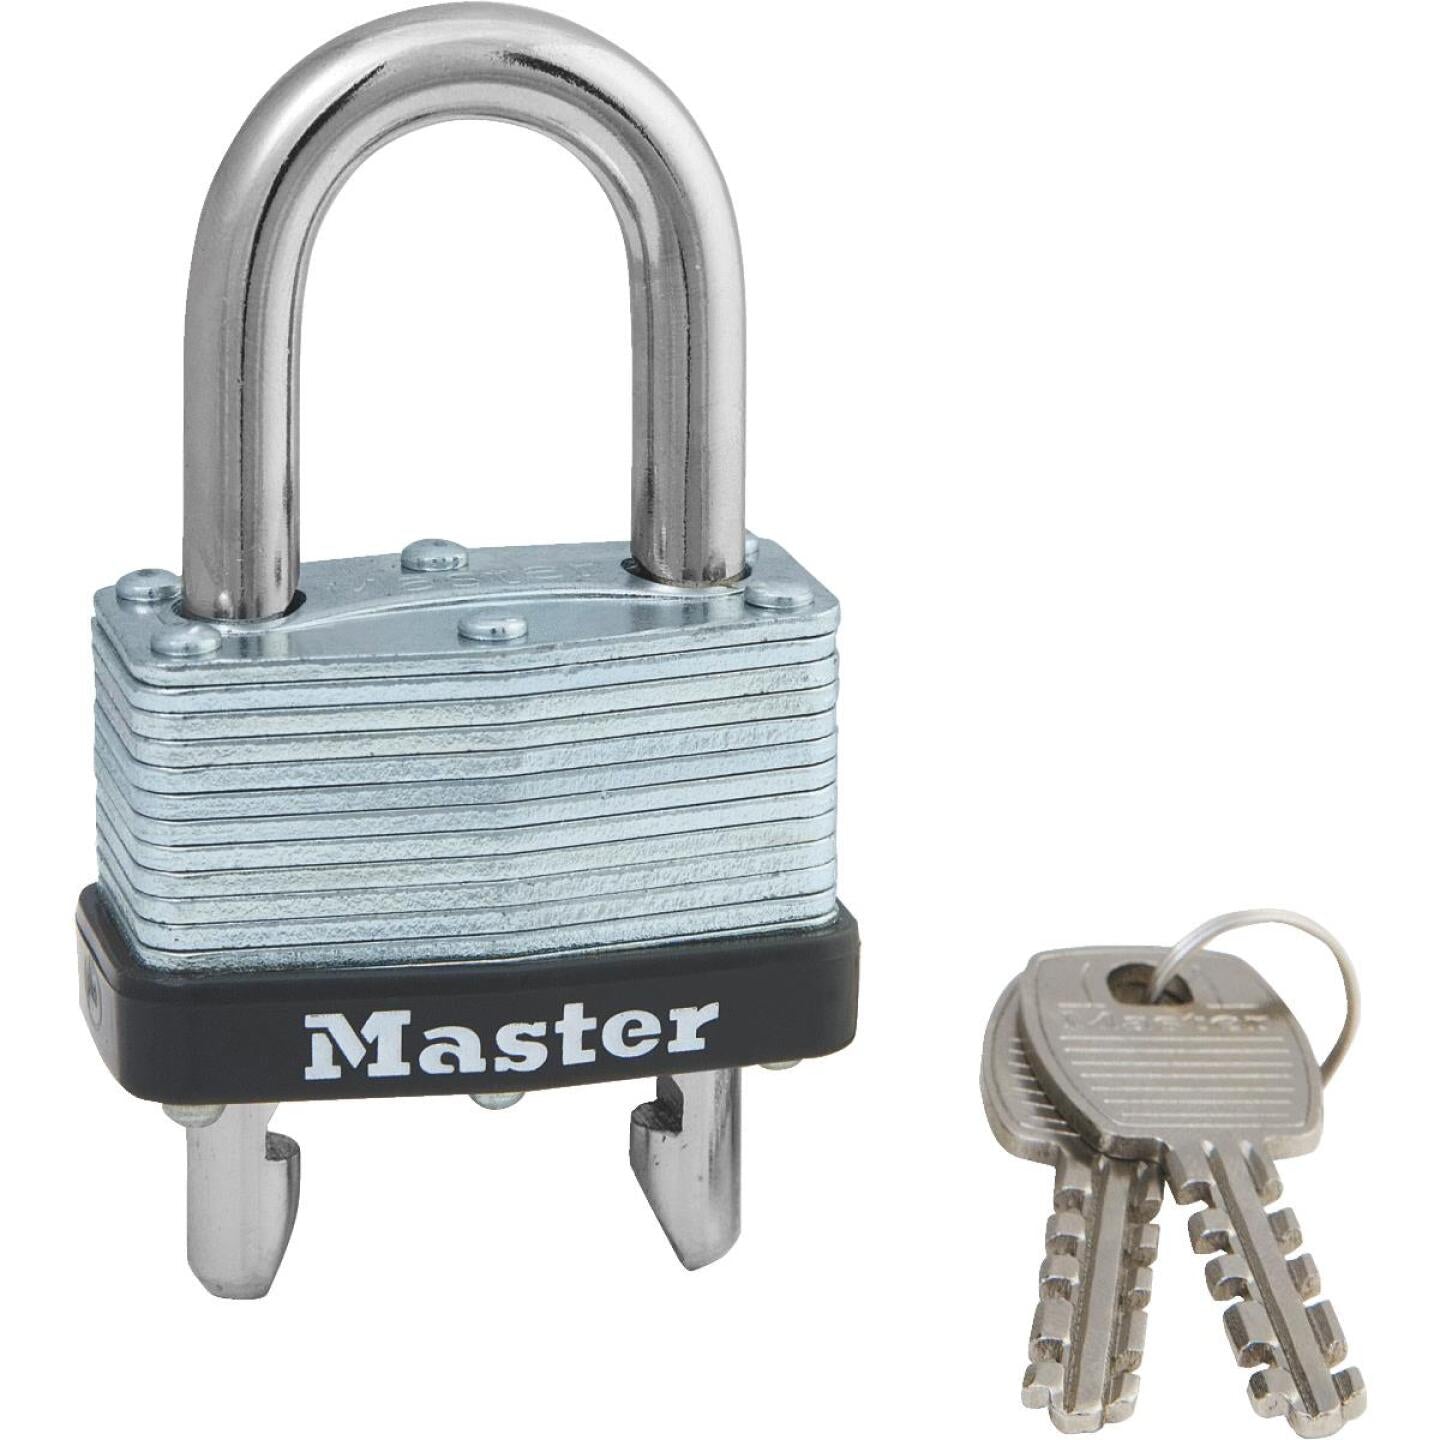 Master Lock, Master Lock 1-3/4 In. W. Warded Keyed Different Padlock with 5/8 In. To 2 In. Adjustable Shackle